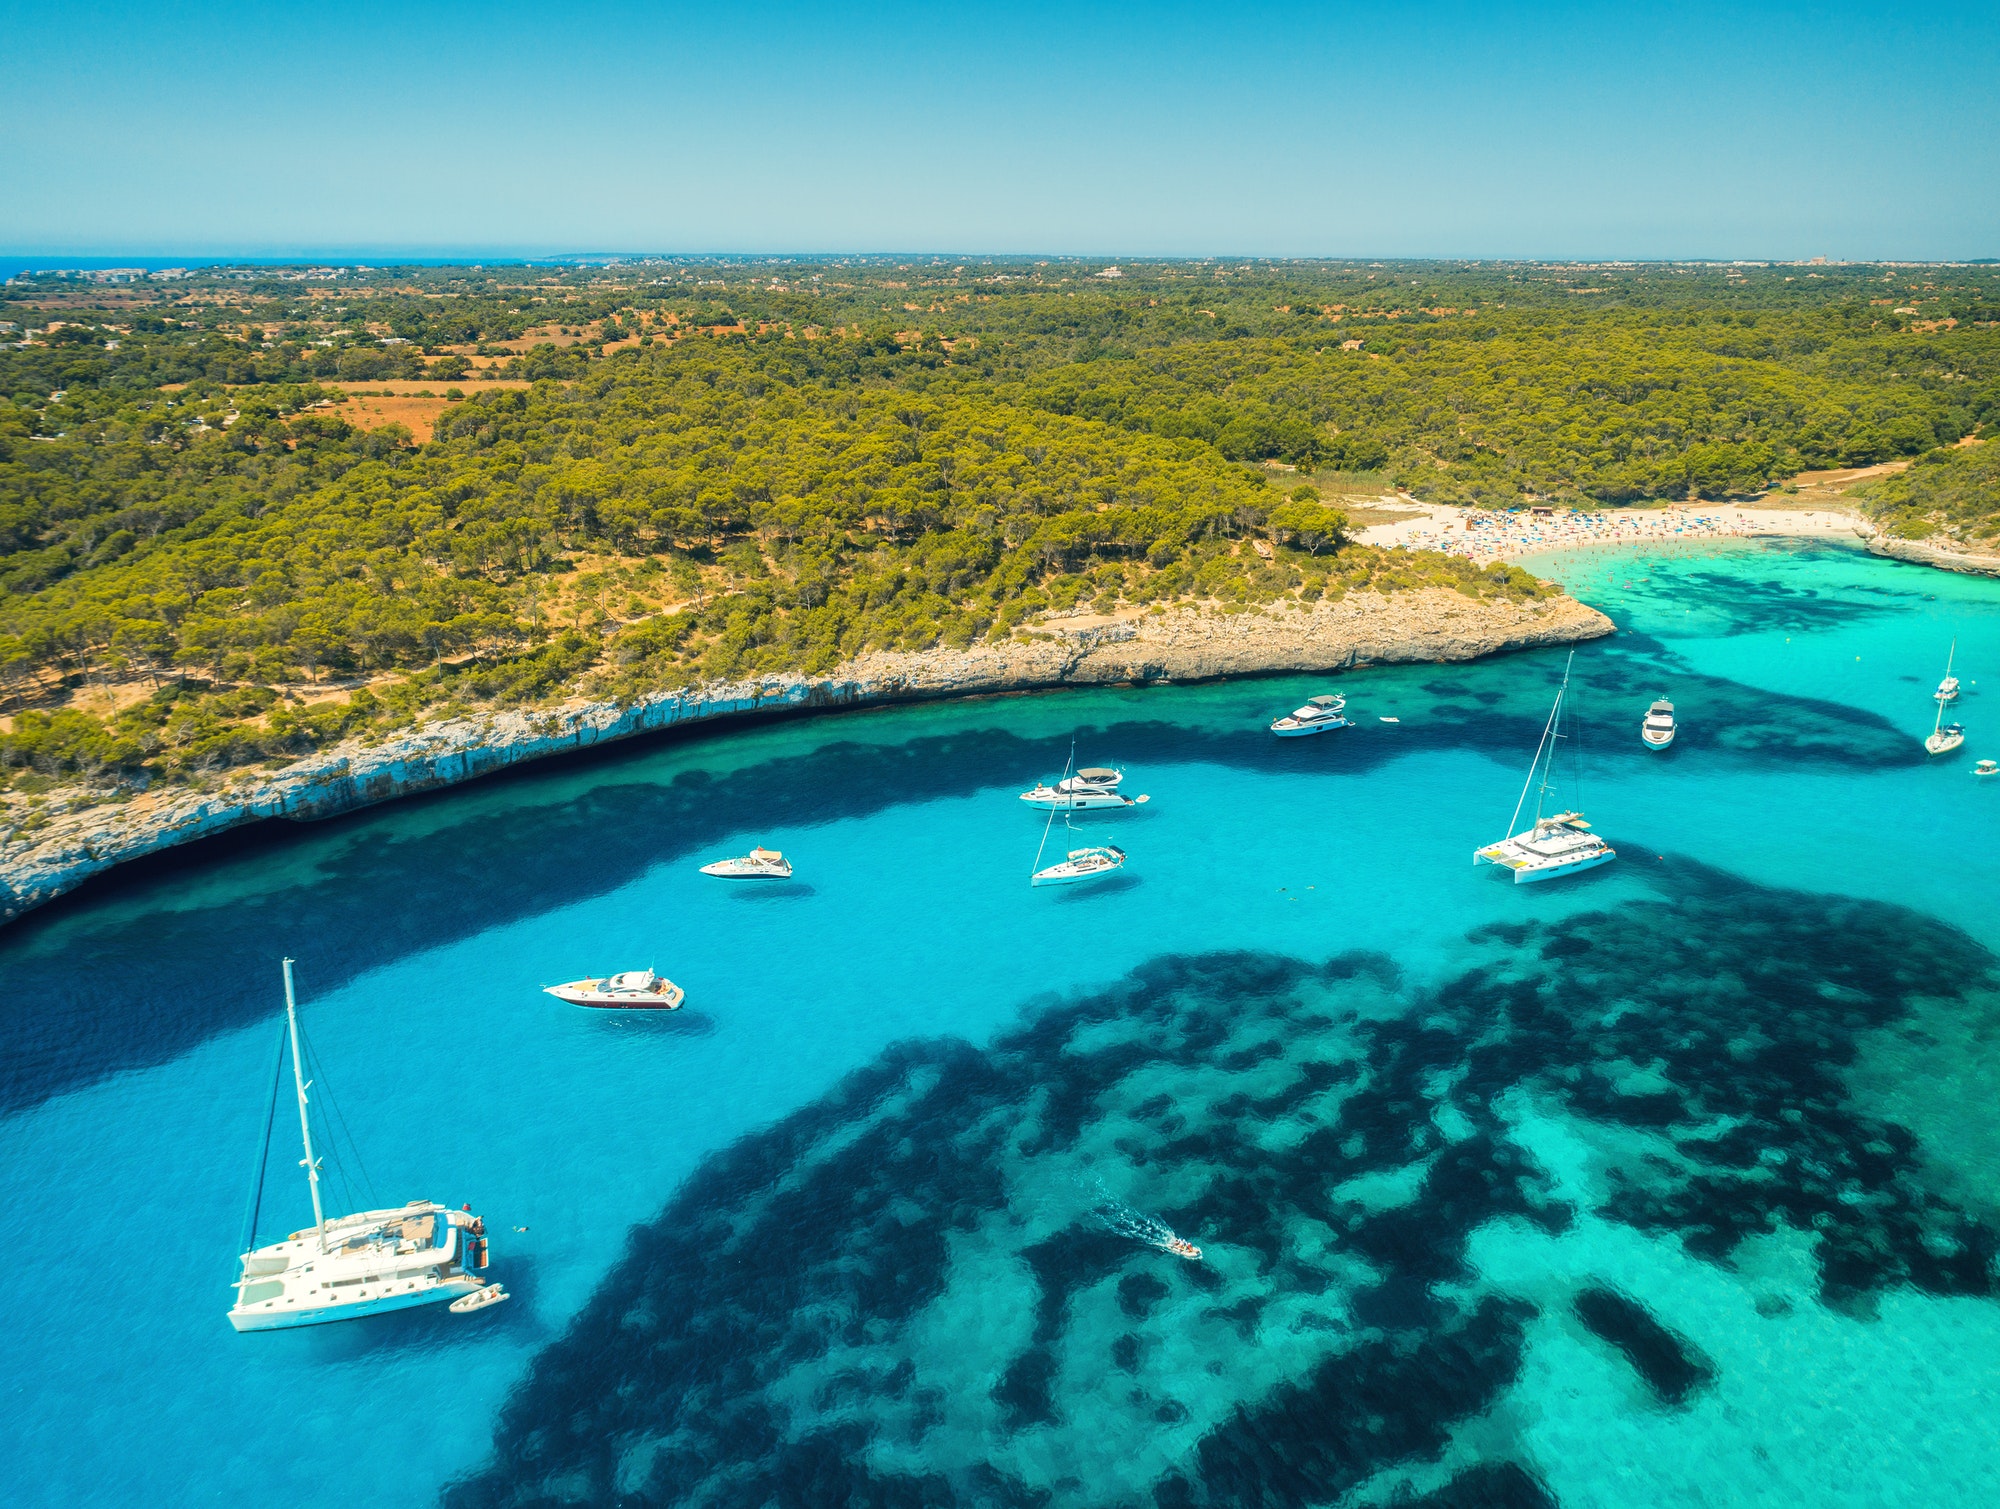 Aerial view of boats, luxury yachts on the sea in sunny day